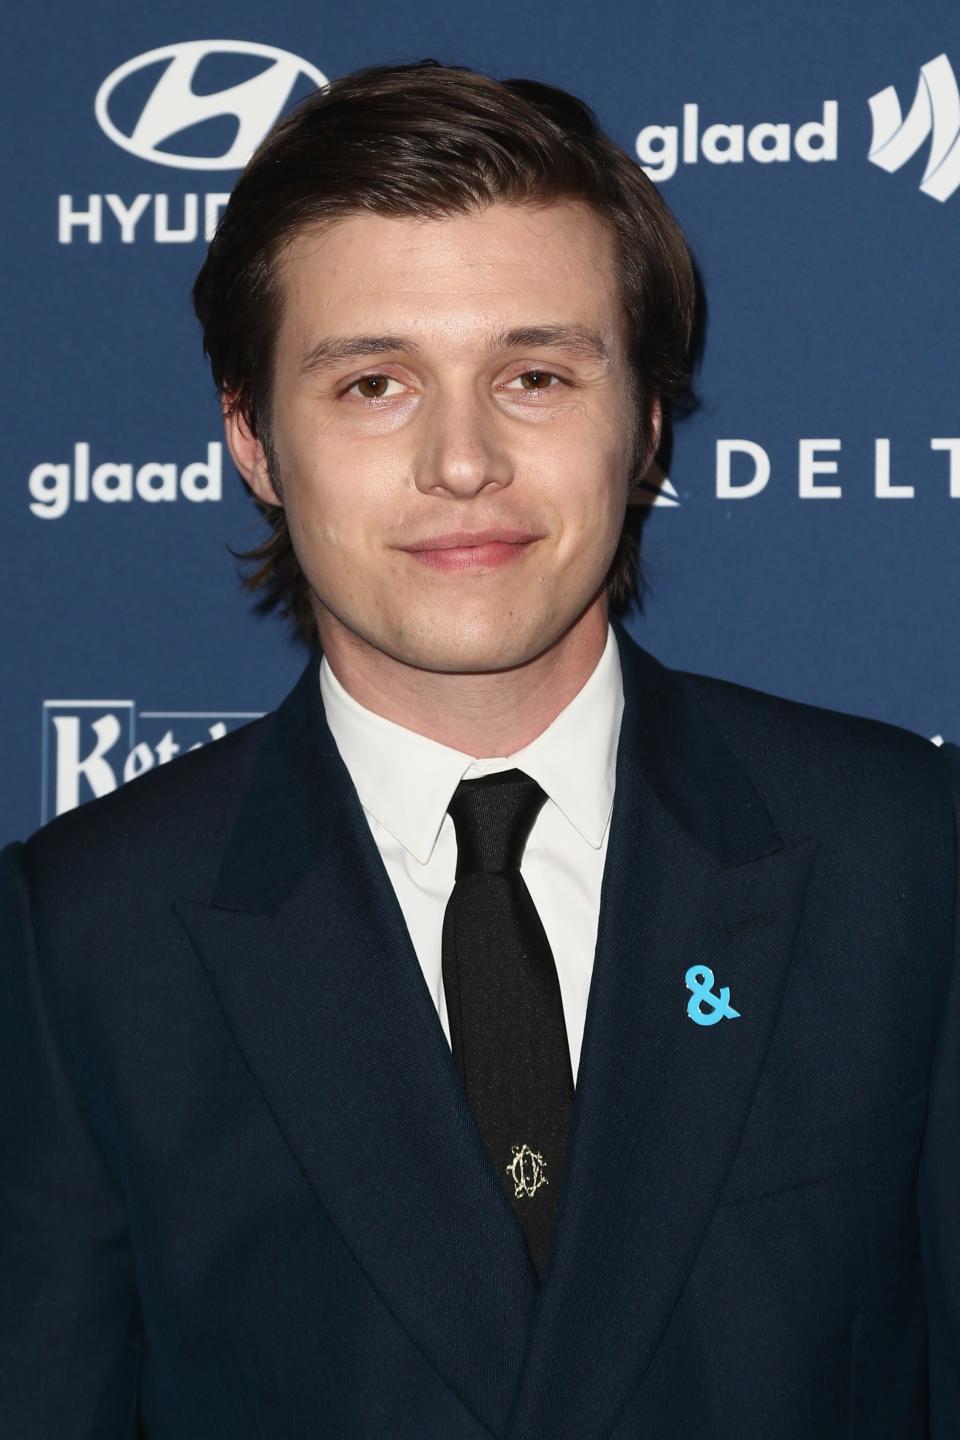 Nick Robinson Has a Gatsby Mullet